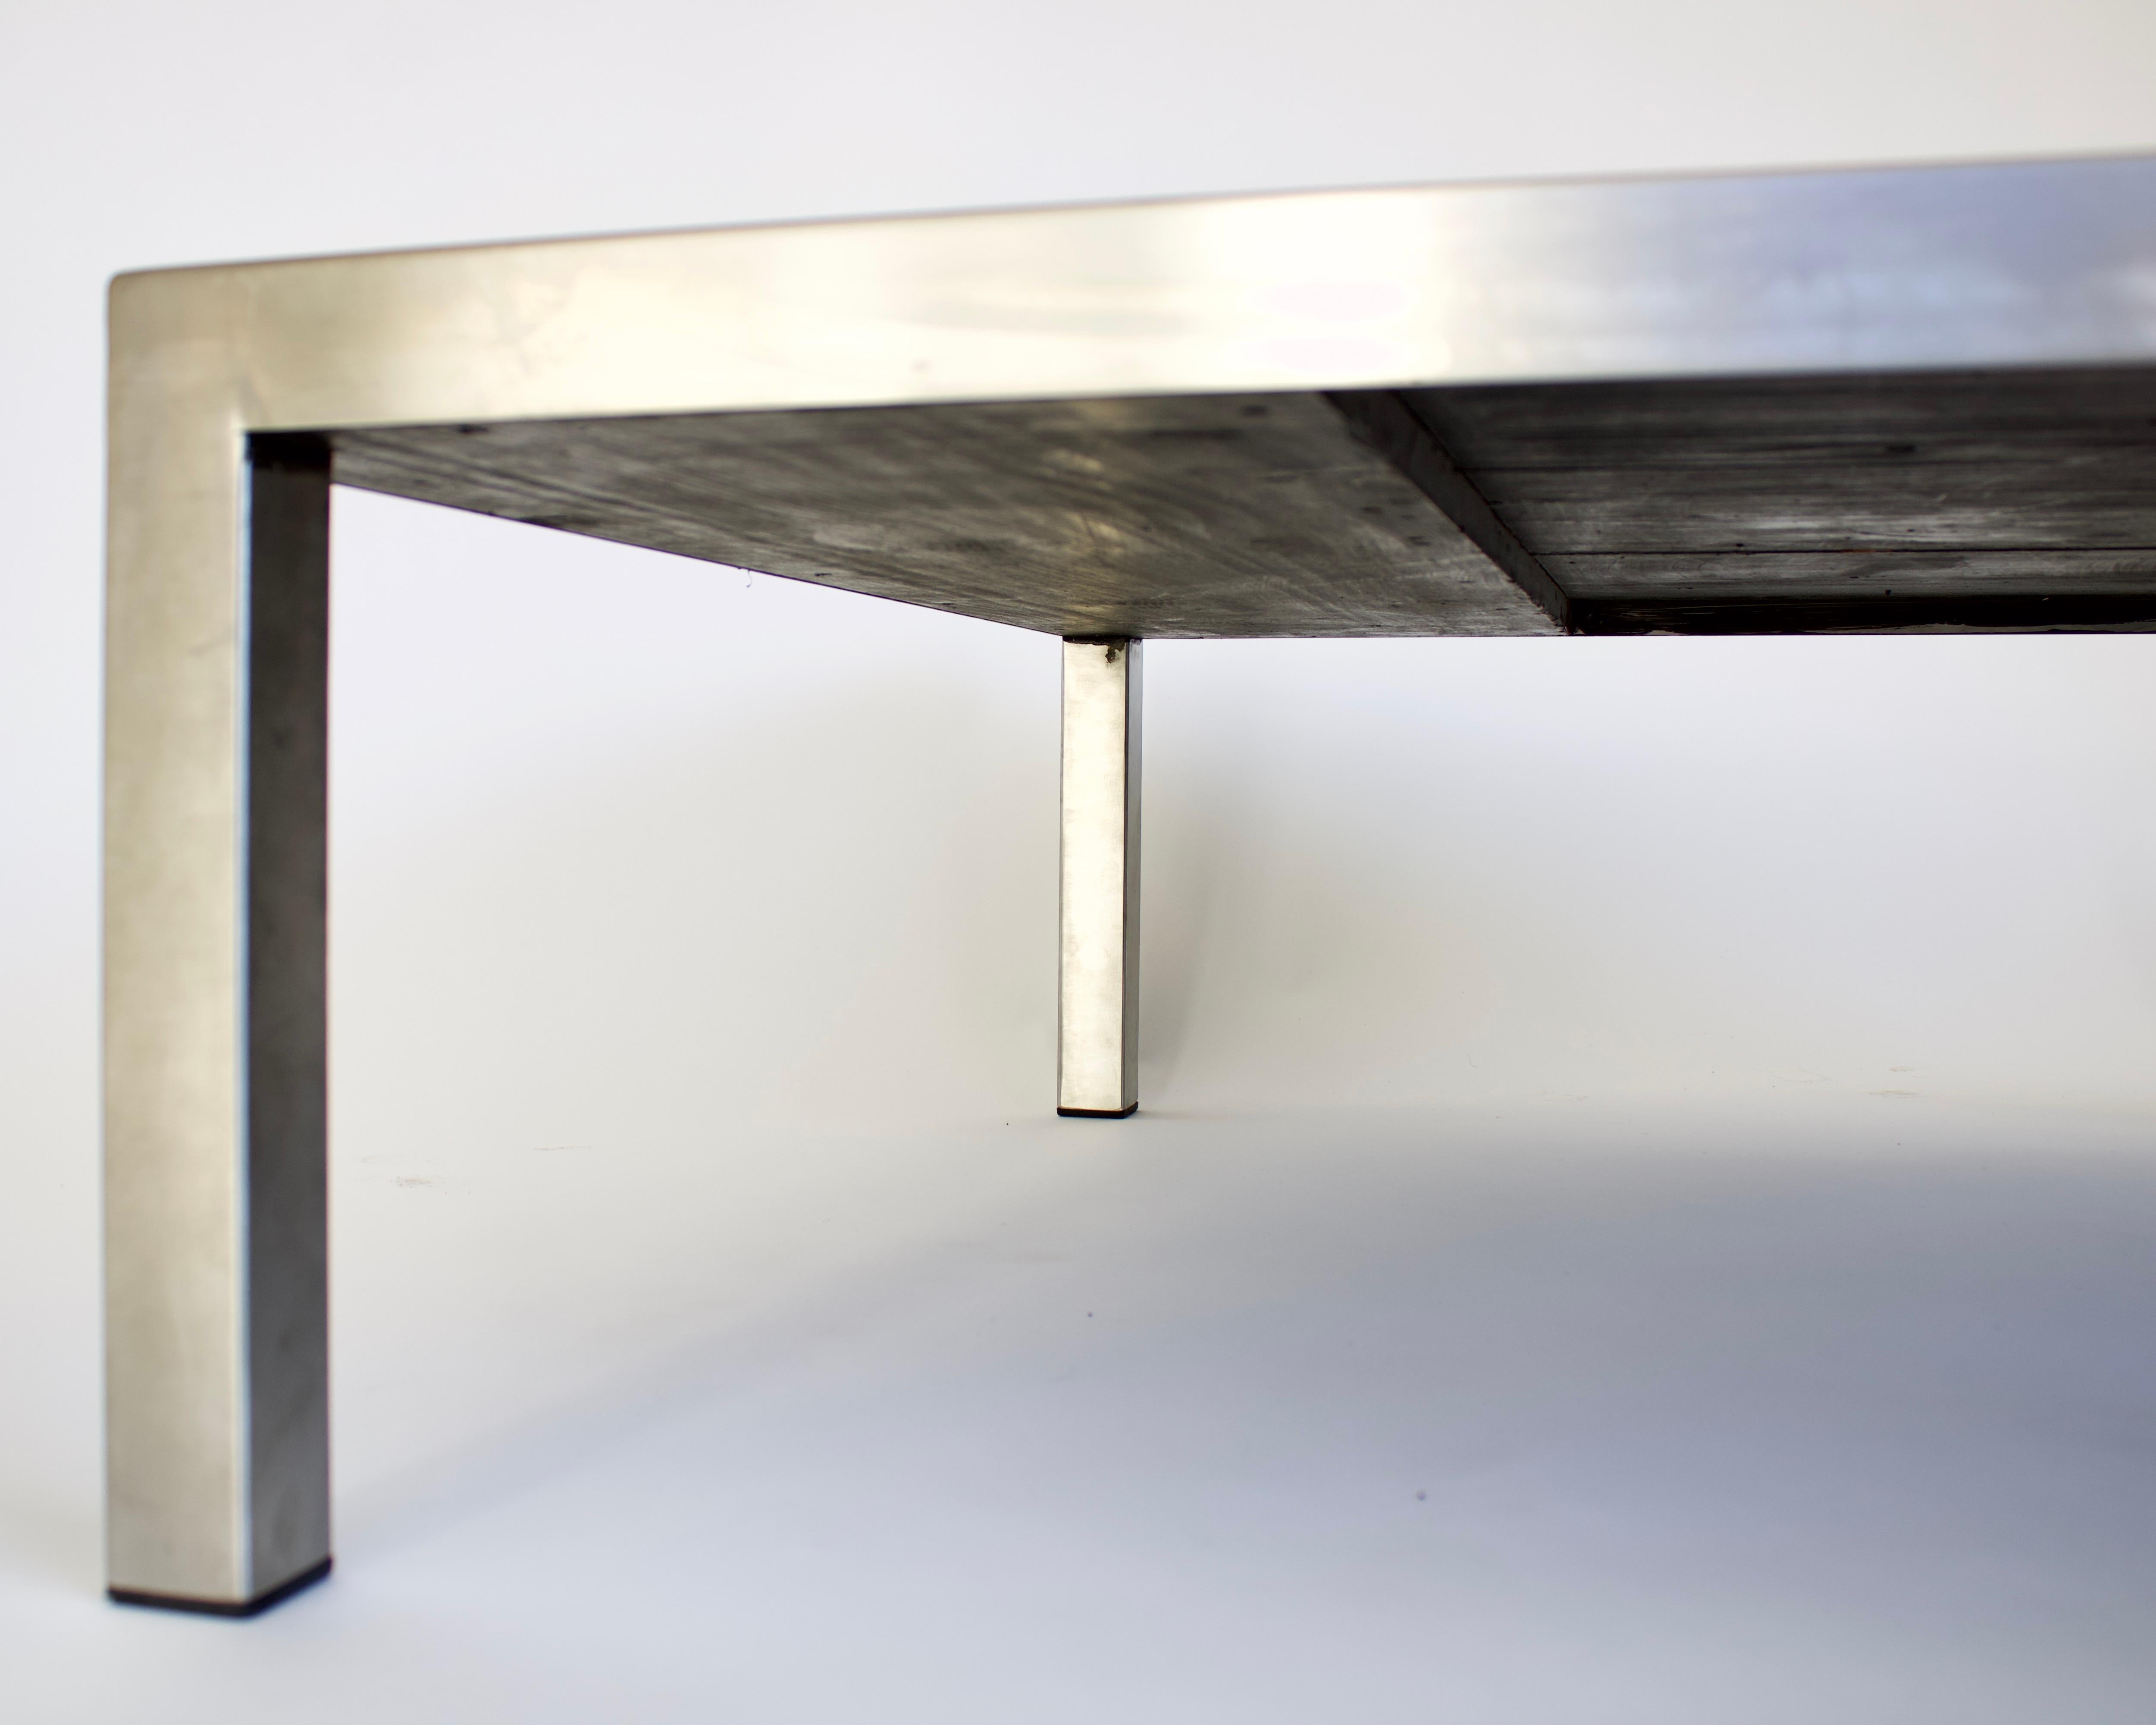 Maria Pergay Square French Stainless Steel Coffee Table, circa 1970 For Sale 3